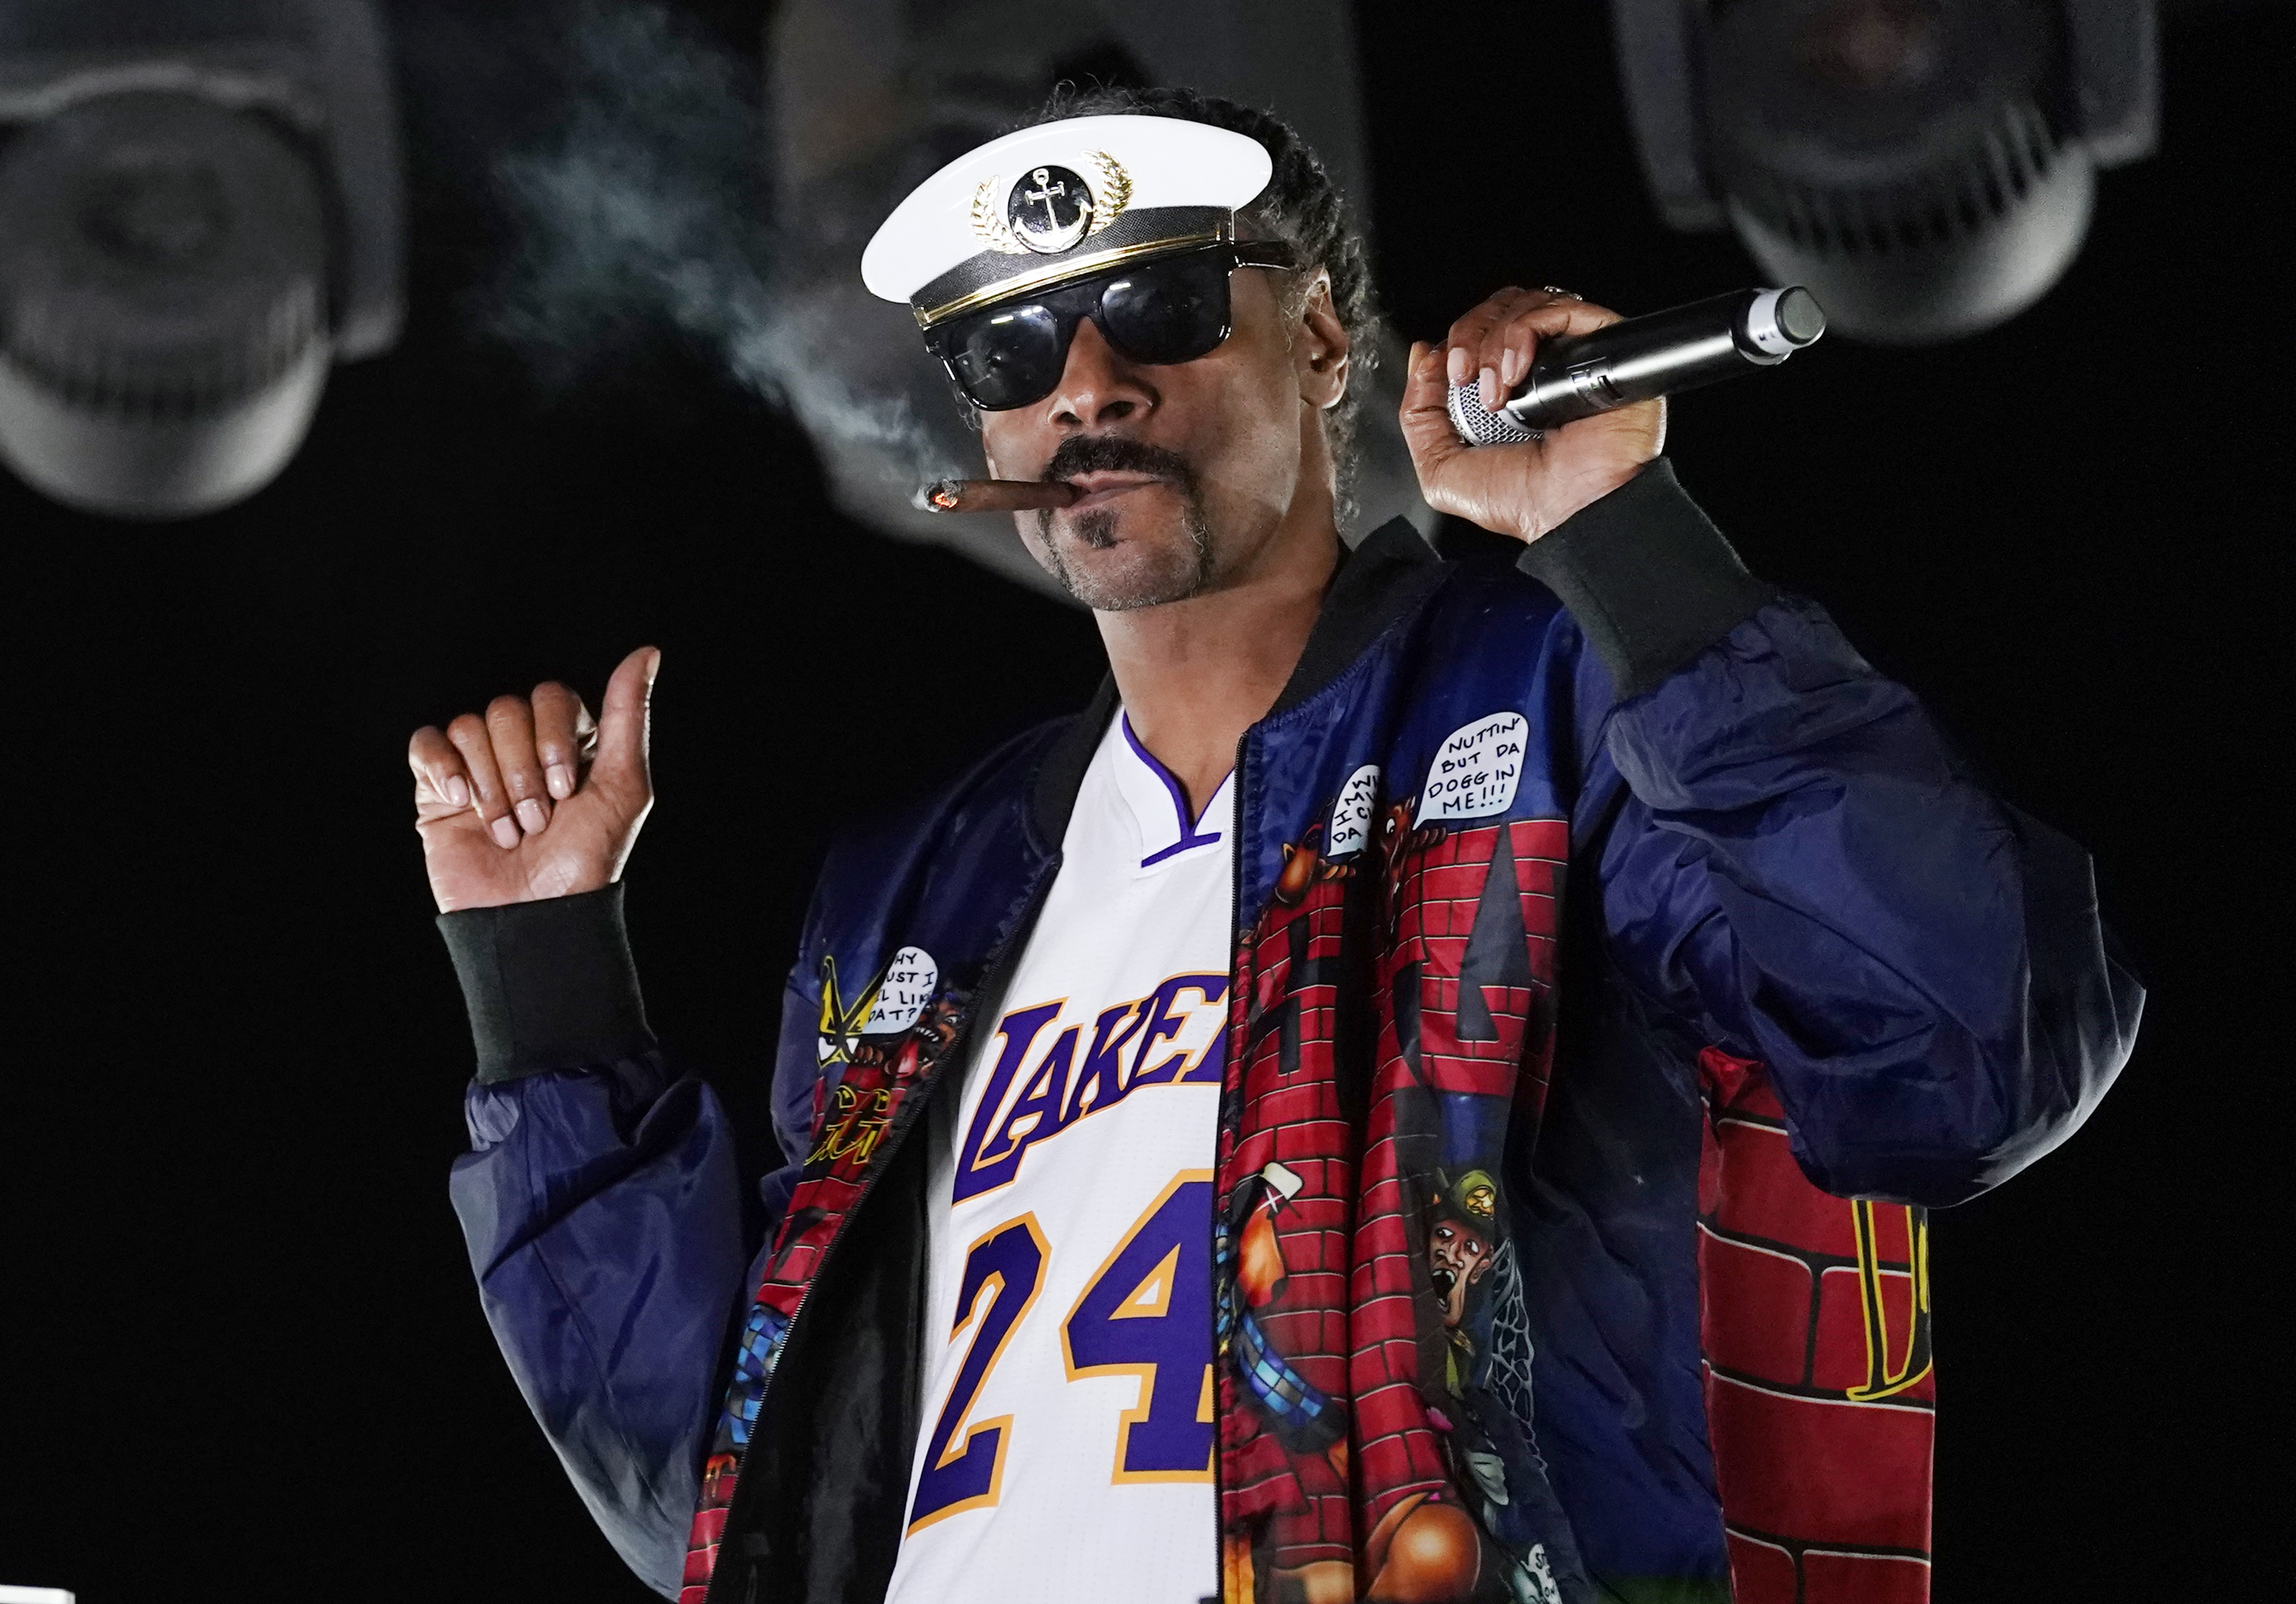 Rapper and media personality Snoop Dogg is putting his name on the Arizona Bowl for what will be the first partnership between an alcohol brand and a college bowl game. The “Snoop Dogg Arizona Bowl Presented by Gin &amp; Juice By Dre and Snoop” is scheduled for Dec. 28 at Arizona Stadium.